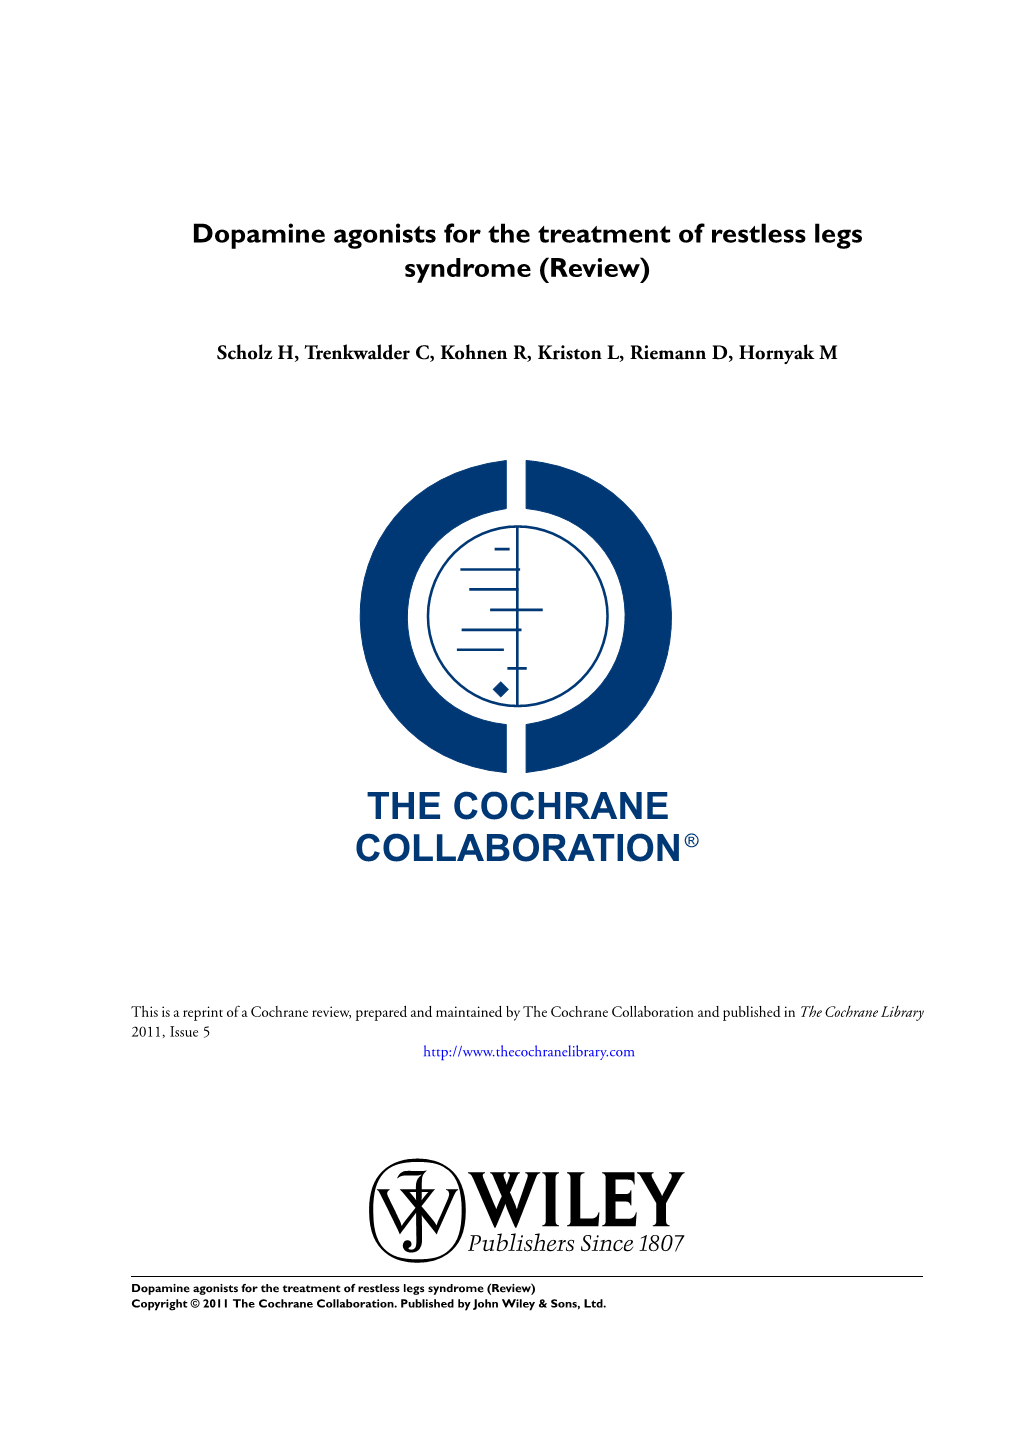 Dopamine Agonists for the Treatment of Restless Legs Syndrome (Review)